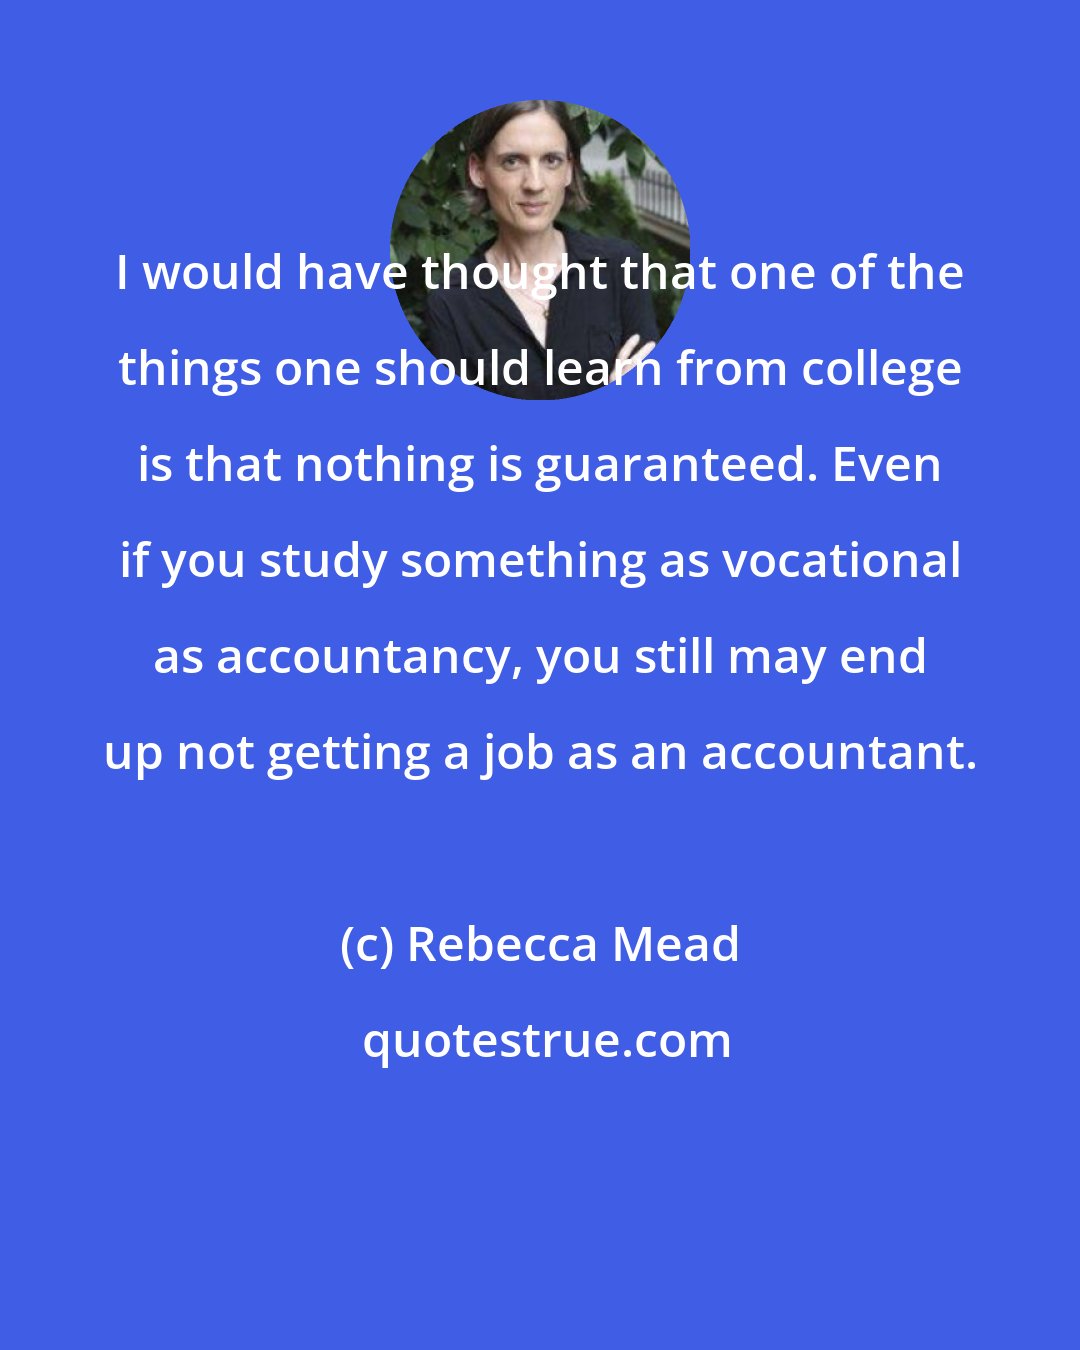 Rebecca Mead: I would have thought that one of the things one should learn from college is that nothing is guaranteed. Even if you study something as vocational as accountancy, you still may end up not getting a job as an accountant.